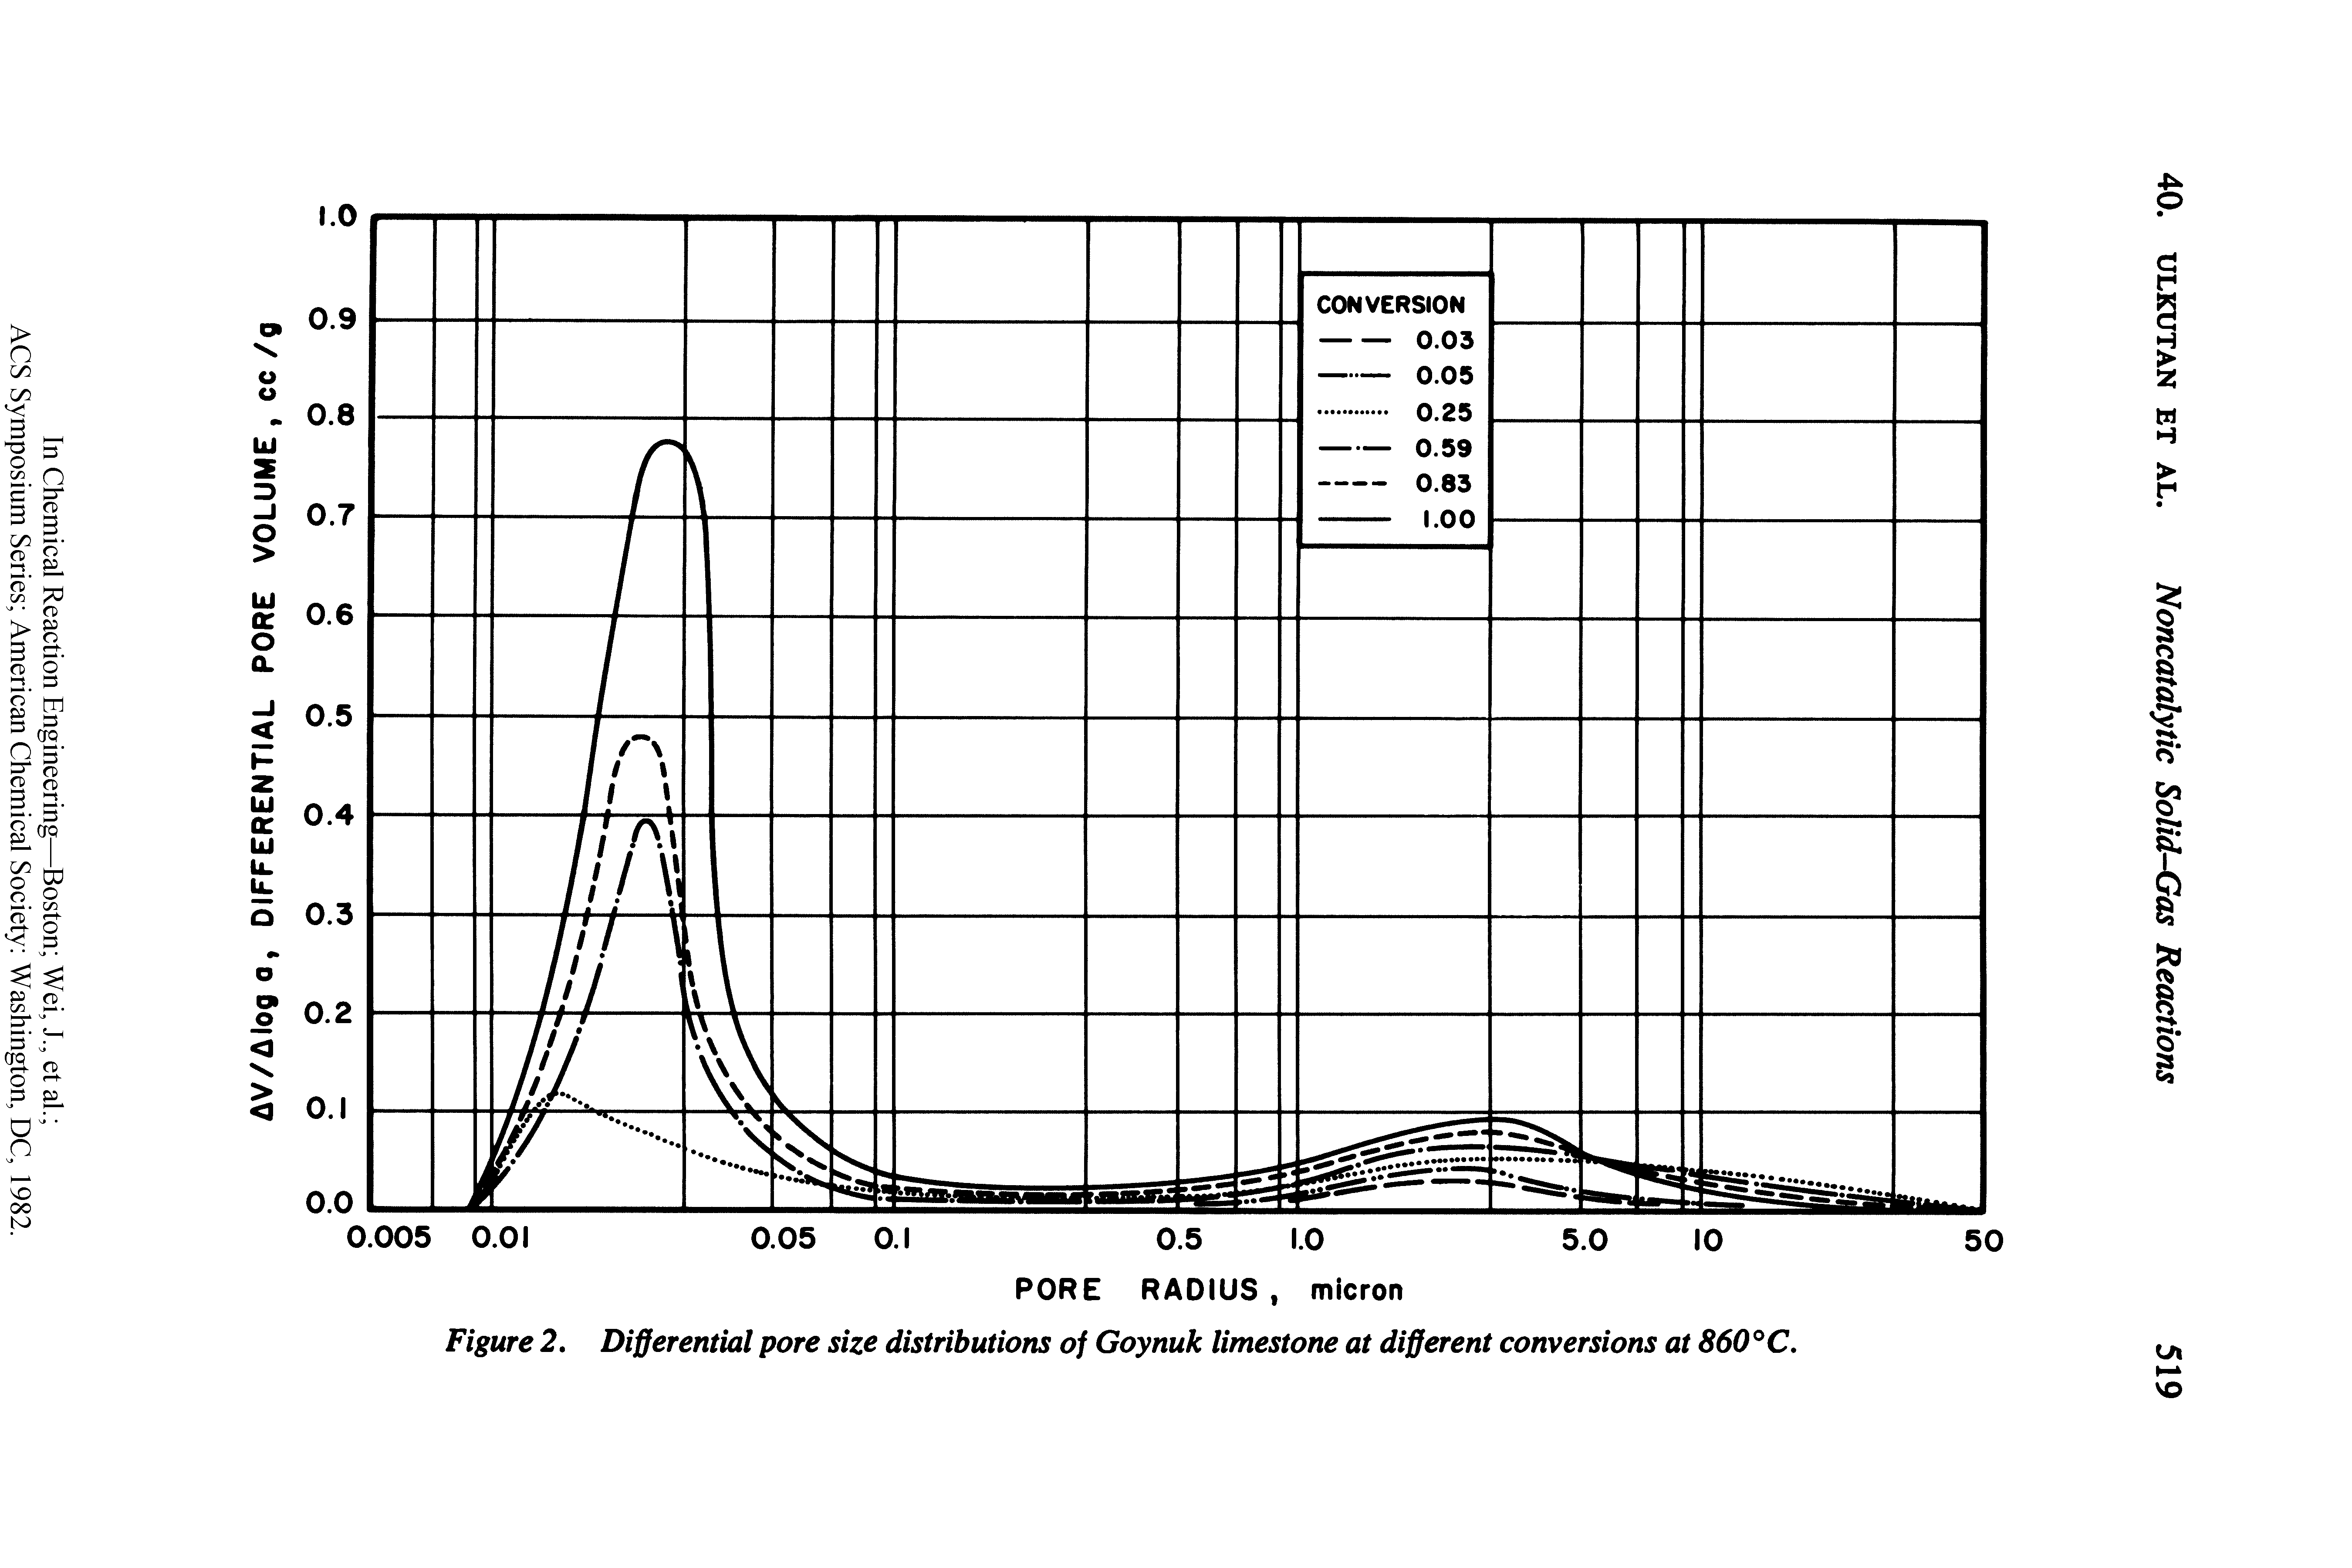 Figure 2. Differential pore size distributions of Goynuk limestone at different conversions at 860°C.